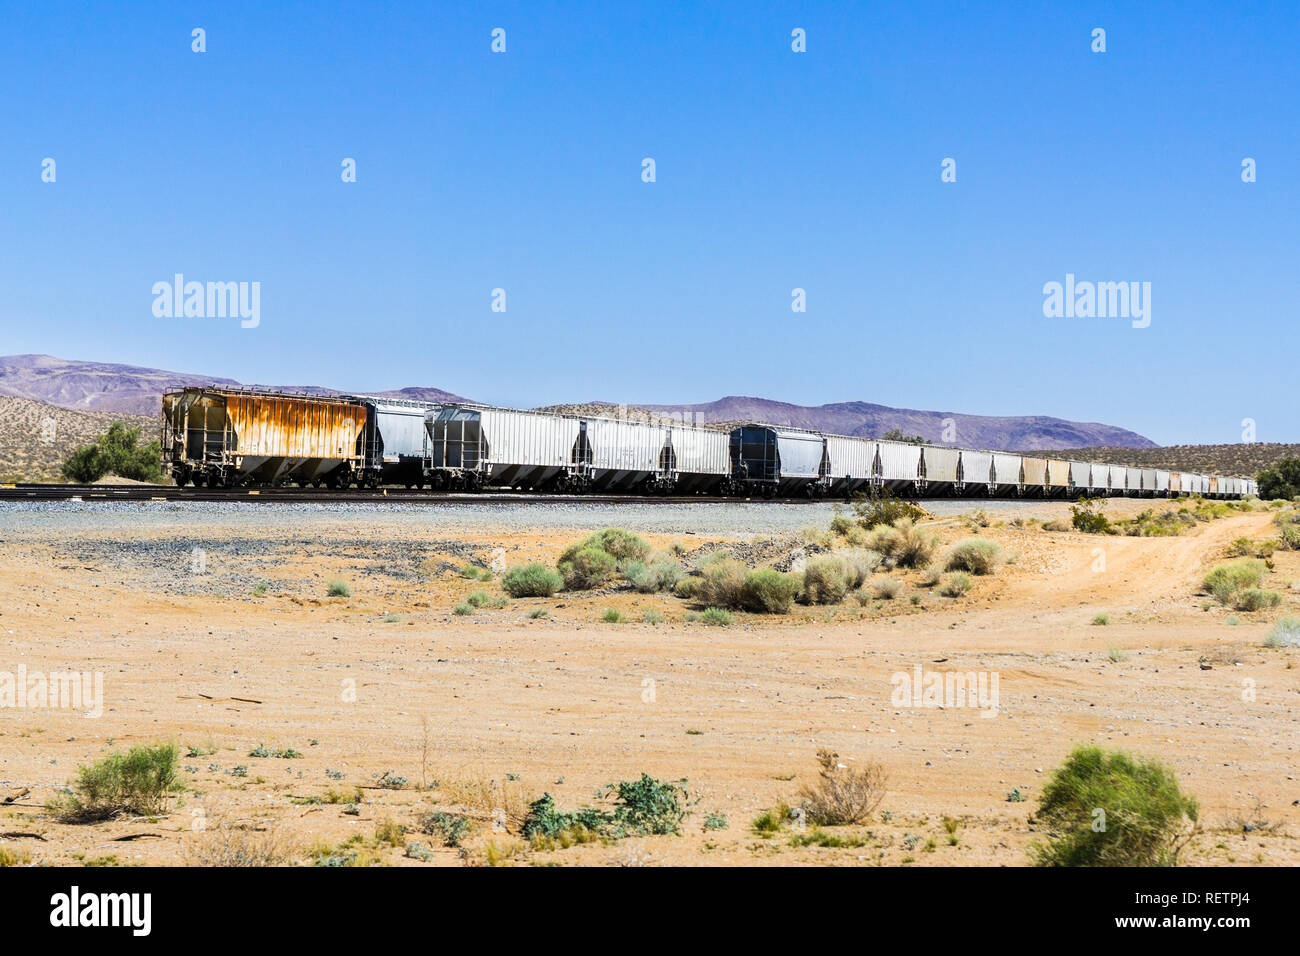 Freight train cars stopped on a desert area, Inyo County, California Stock Photo